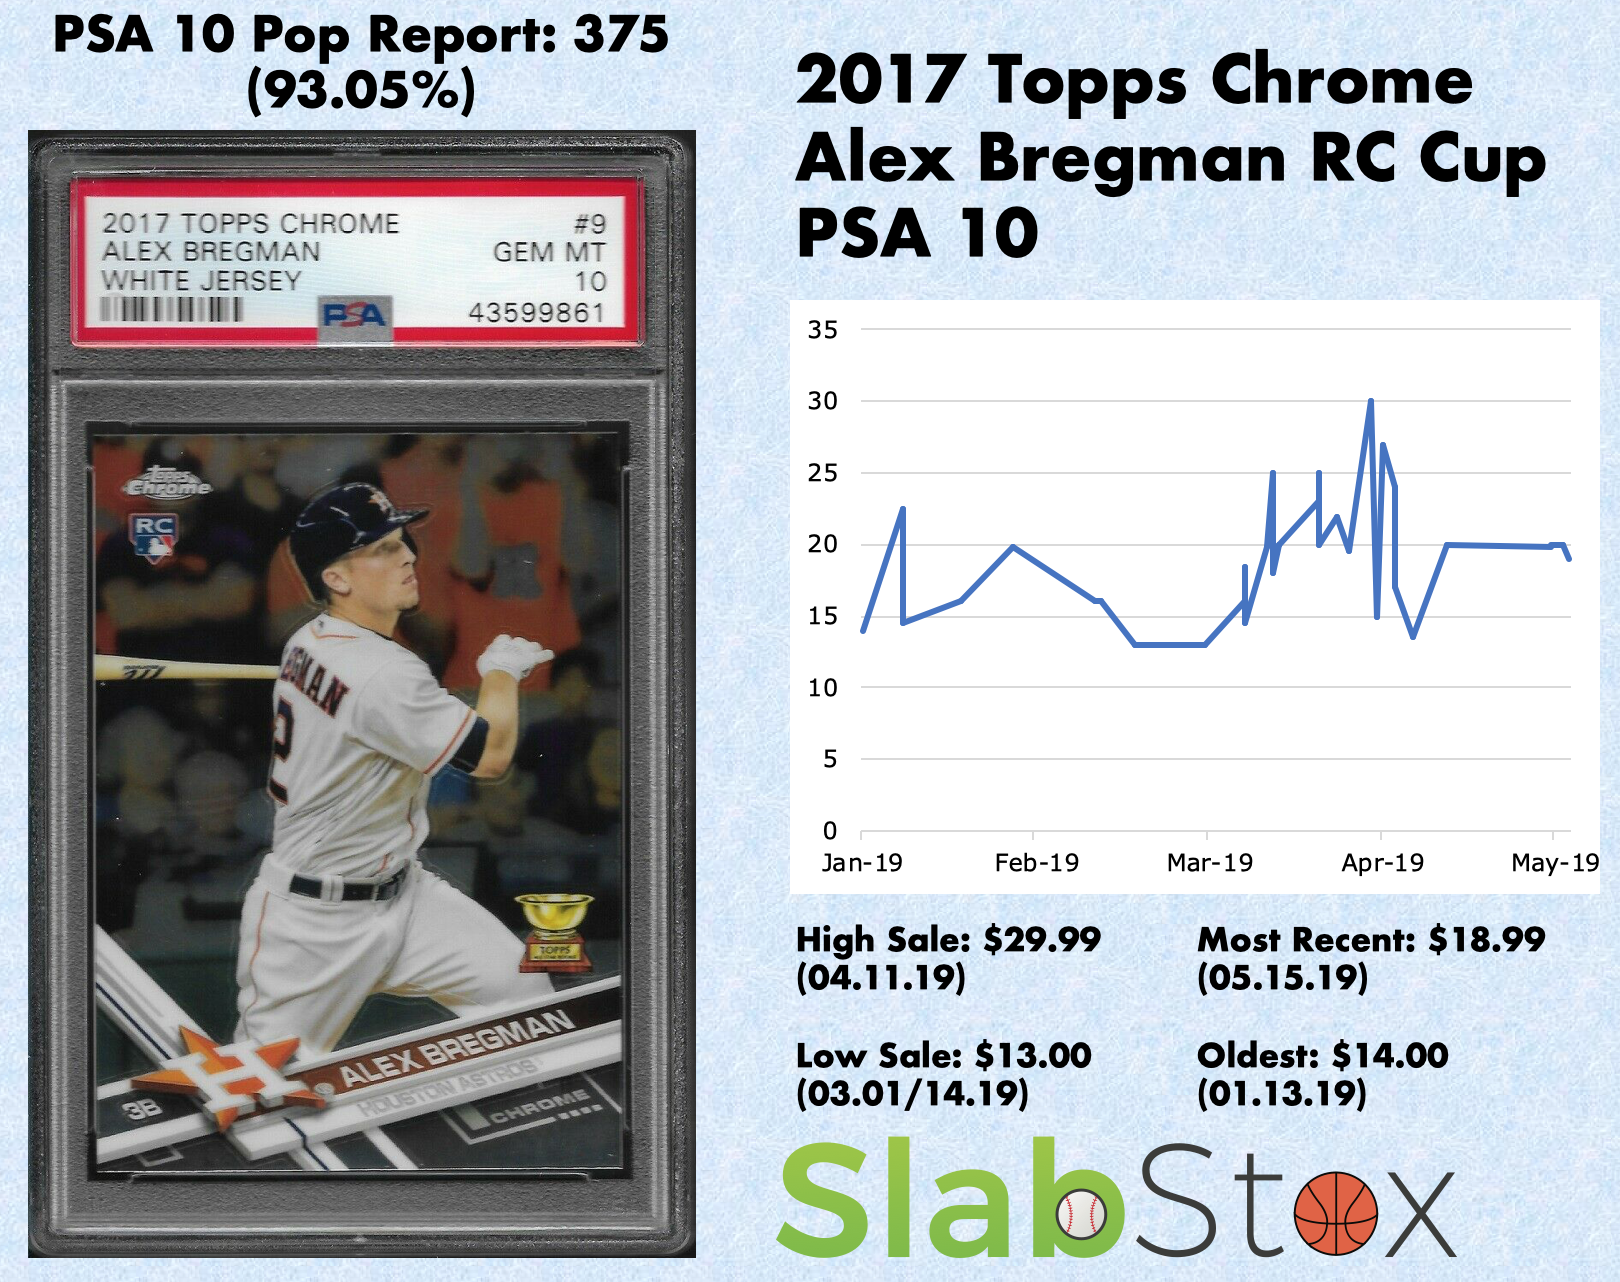 SlabStox infographic from 2017 Topps Chrome Alex Bregman RC Cup PSA 10 sports trading card